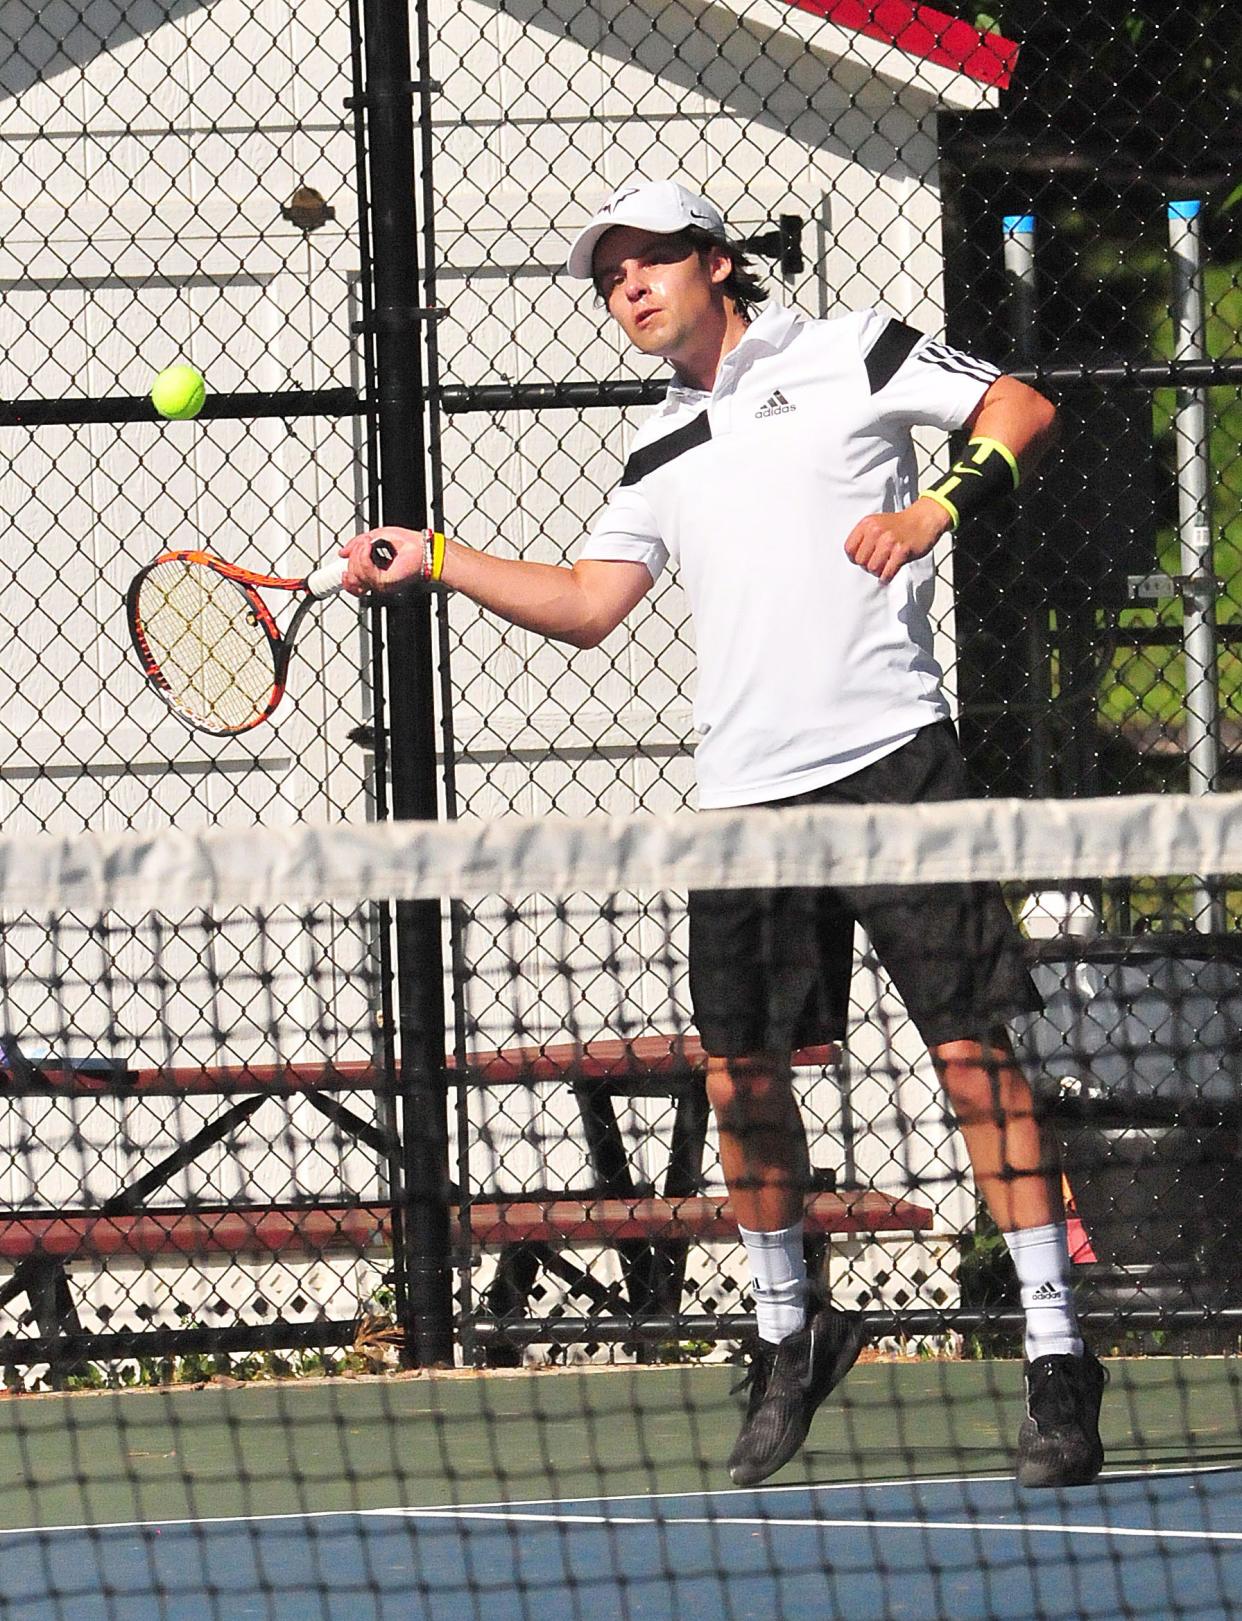 Scott Frazee returns the ball during the Times-Gazette Tennis Open Saturday, June 25, 2022 at Brookside Park's tennis courts.